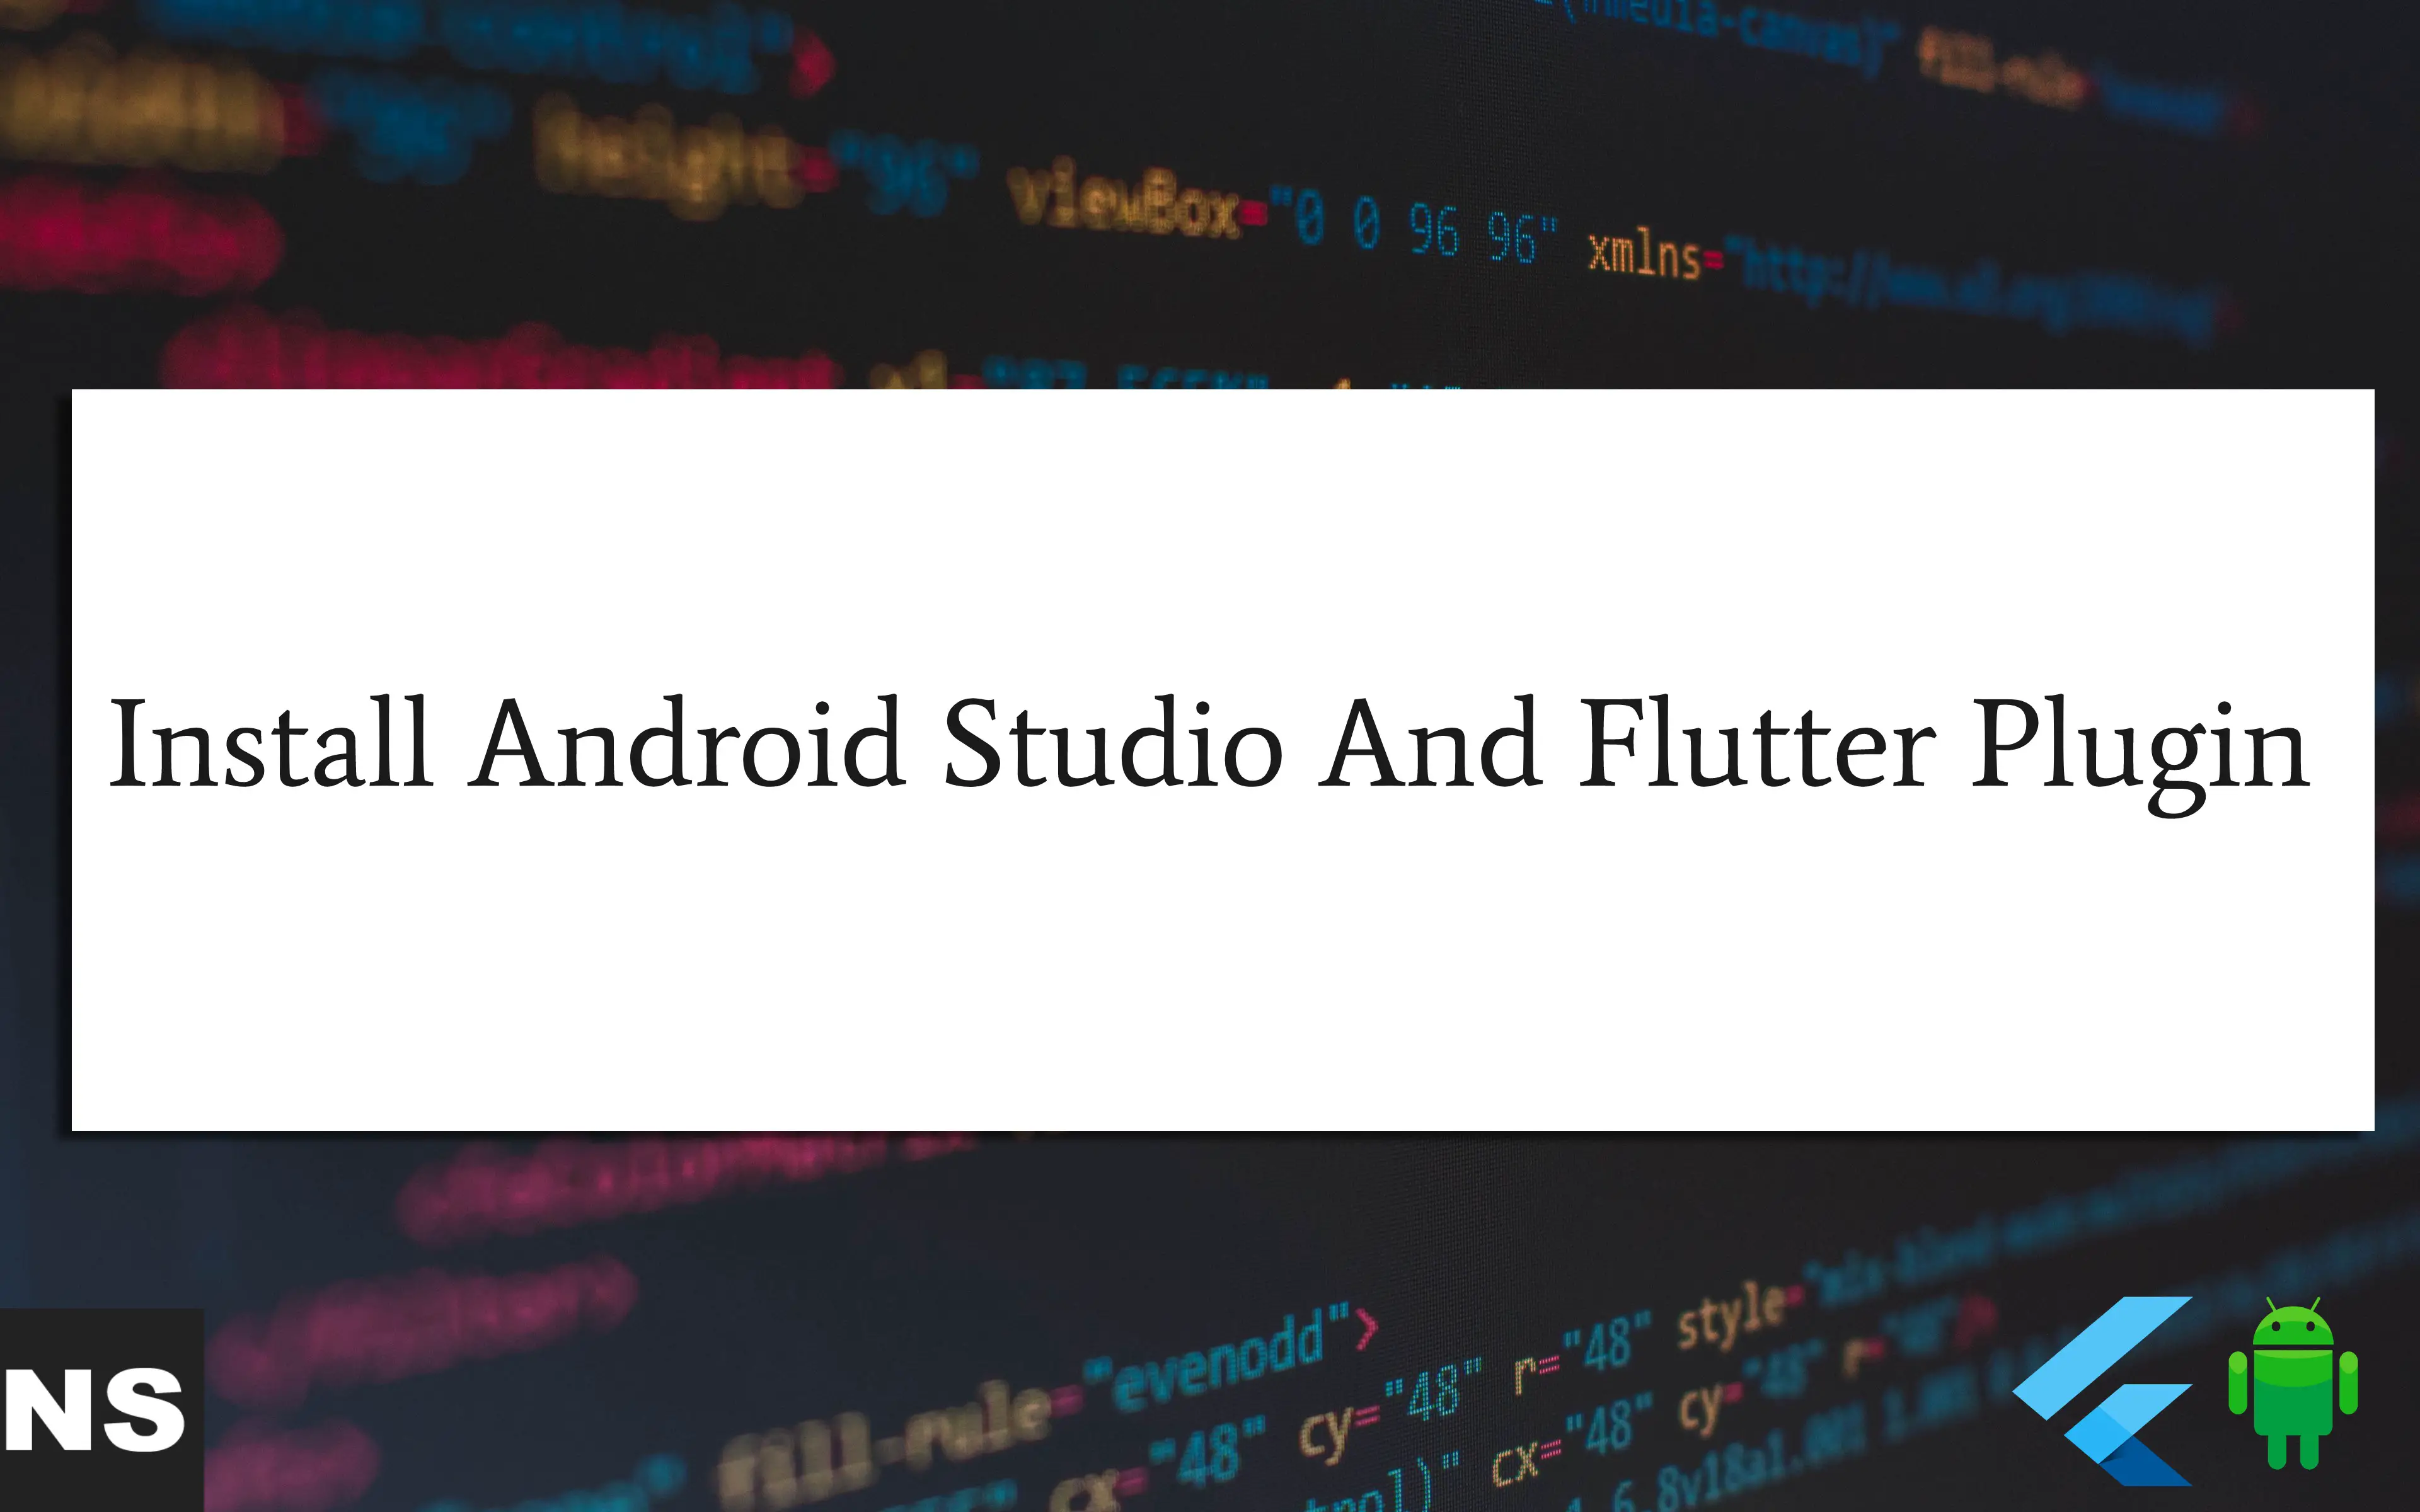 How To Install Android Studio And Flutter Plugin